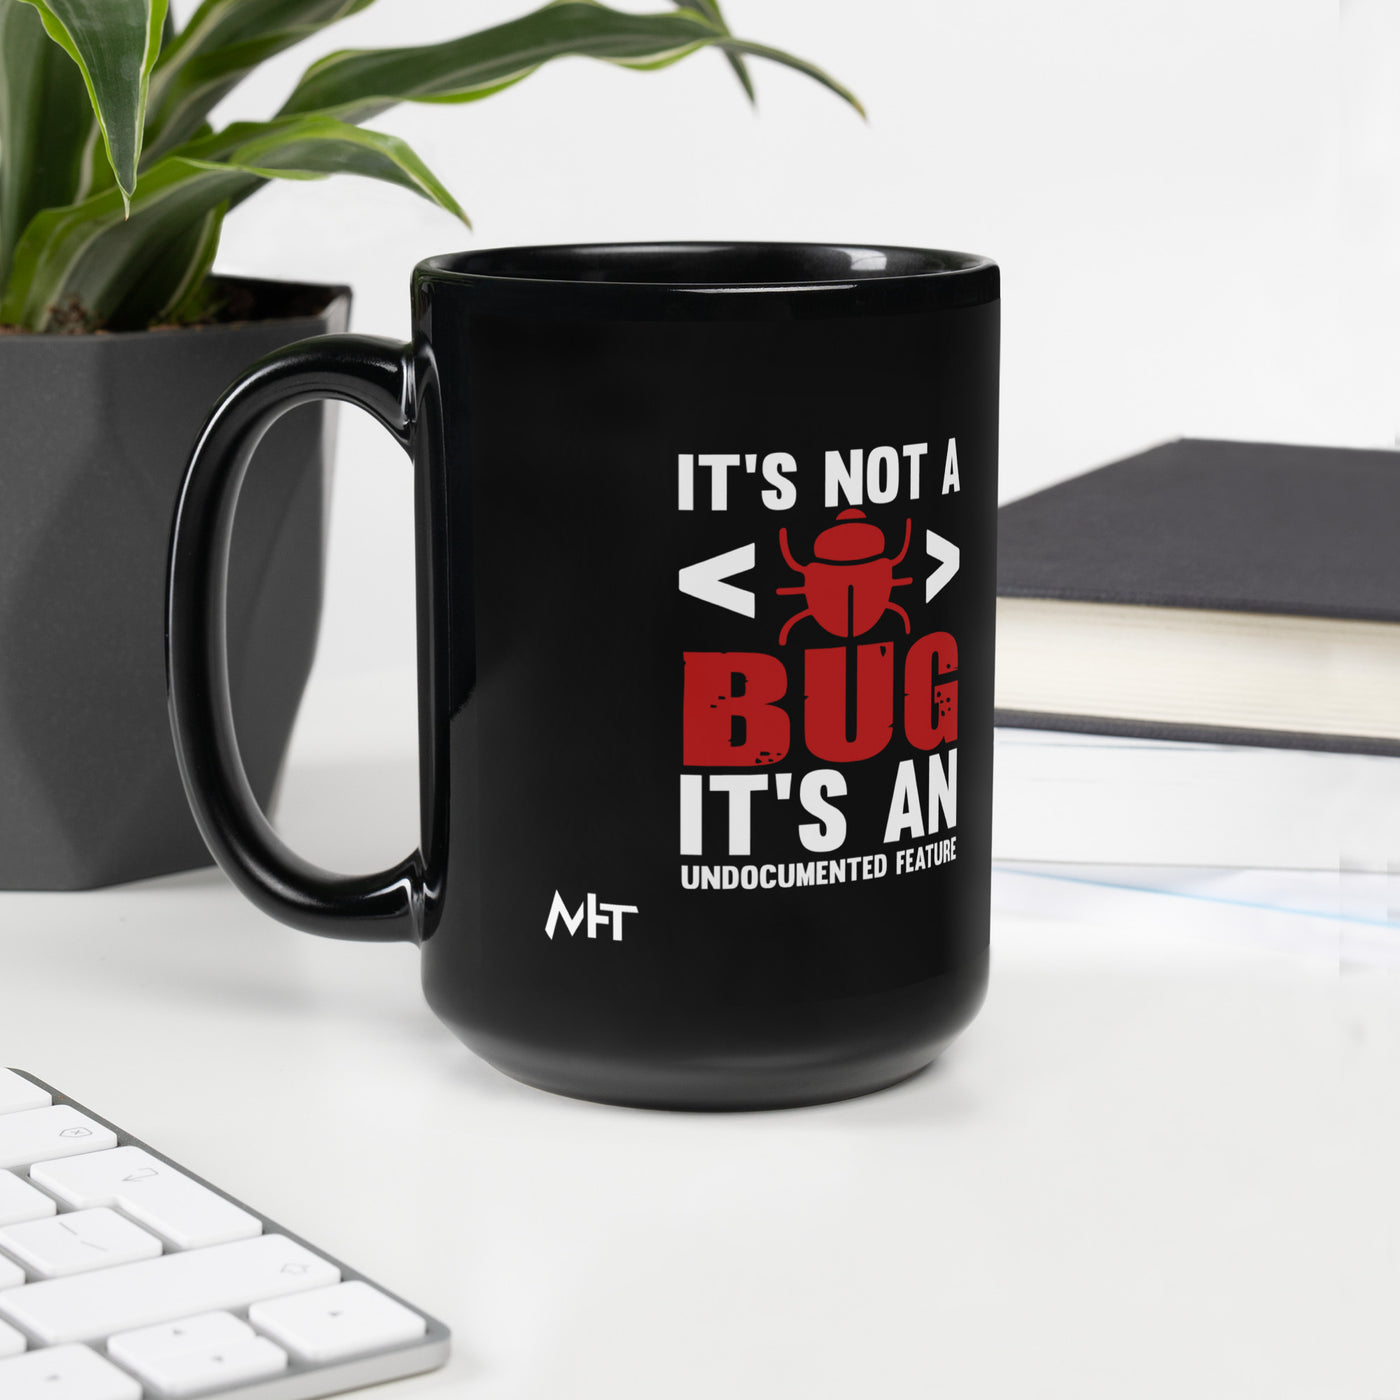 It's not a Bug; it's an Undocumented Feature - Black Glossy Mug